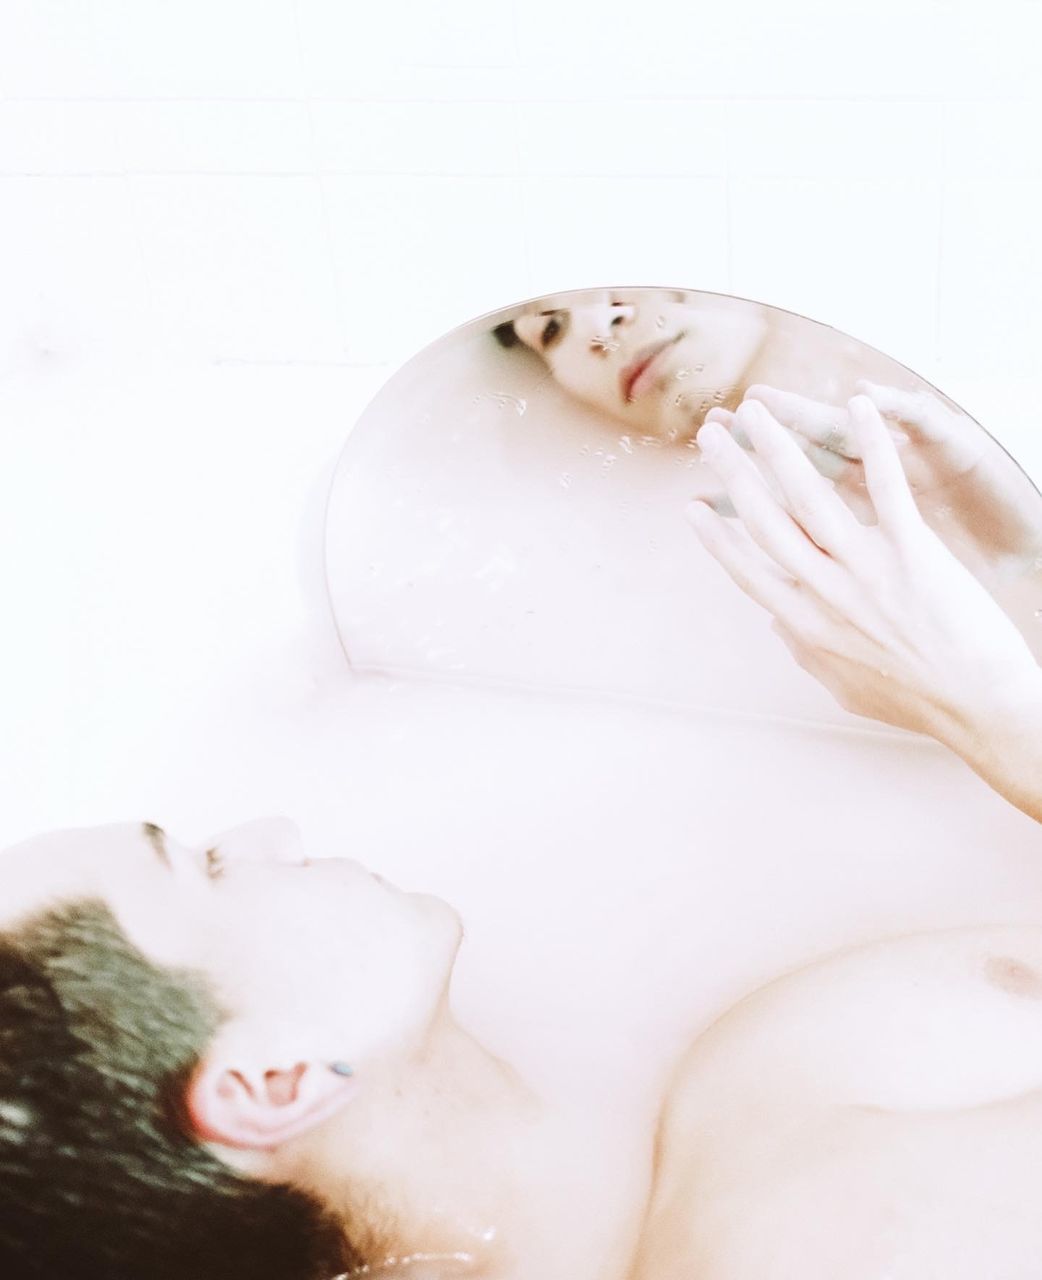 Bathtub Indoors  One Person Taking A Bath Adult Domestic Bathroom Bathroom Water Women Human Face Soap Sud Hygiene Eyes Closed  Relaxation Young Adult Domestic Room Hand Body Care Portrait Nature